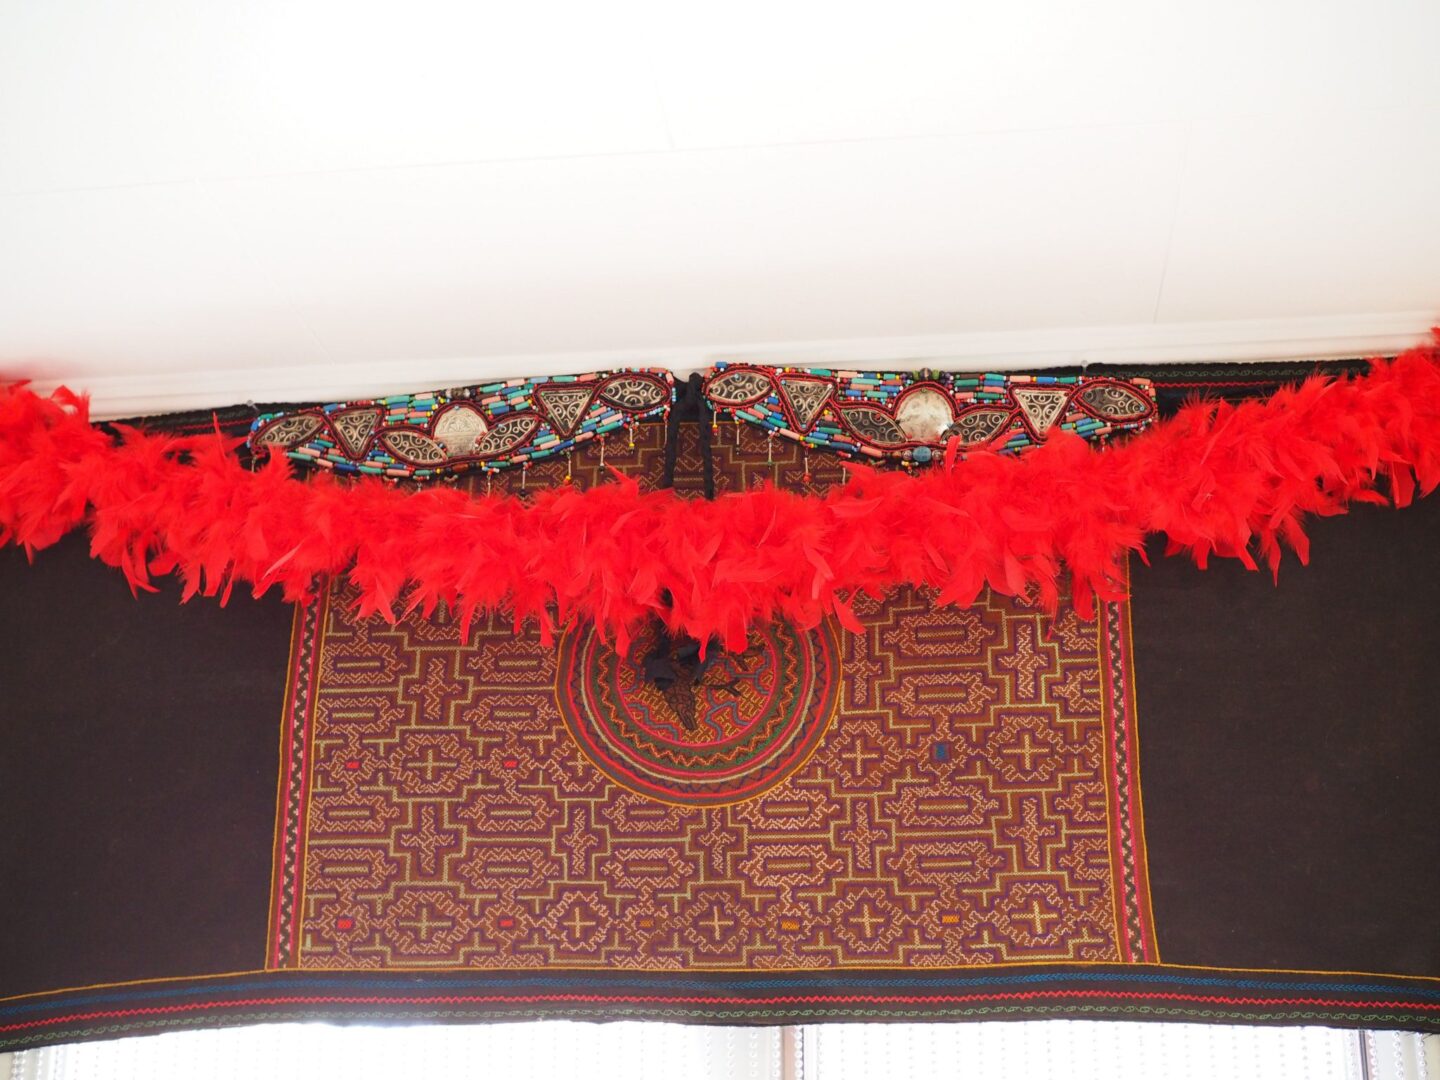 A red feather boa hanging from the ceiling.